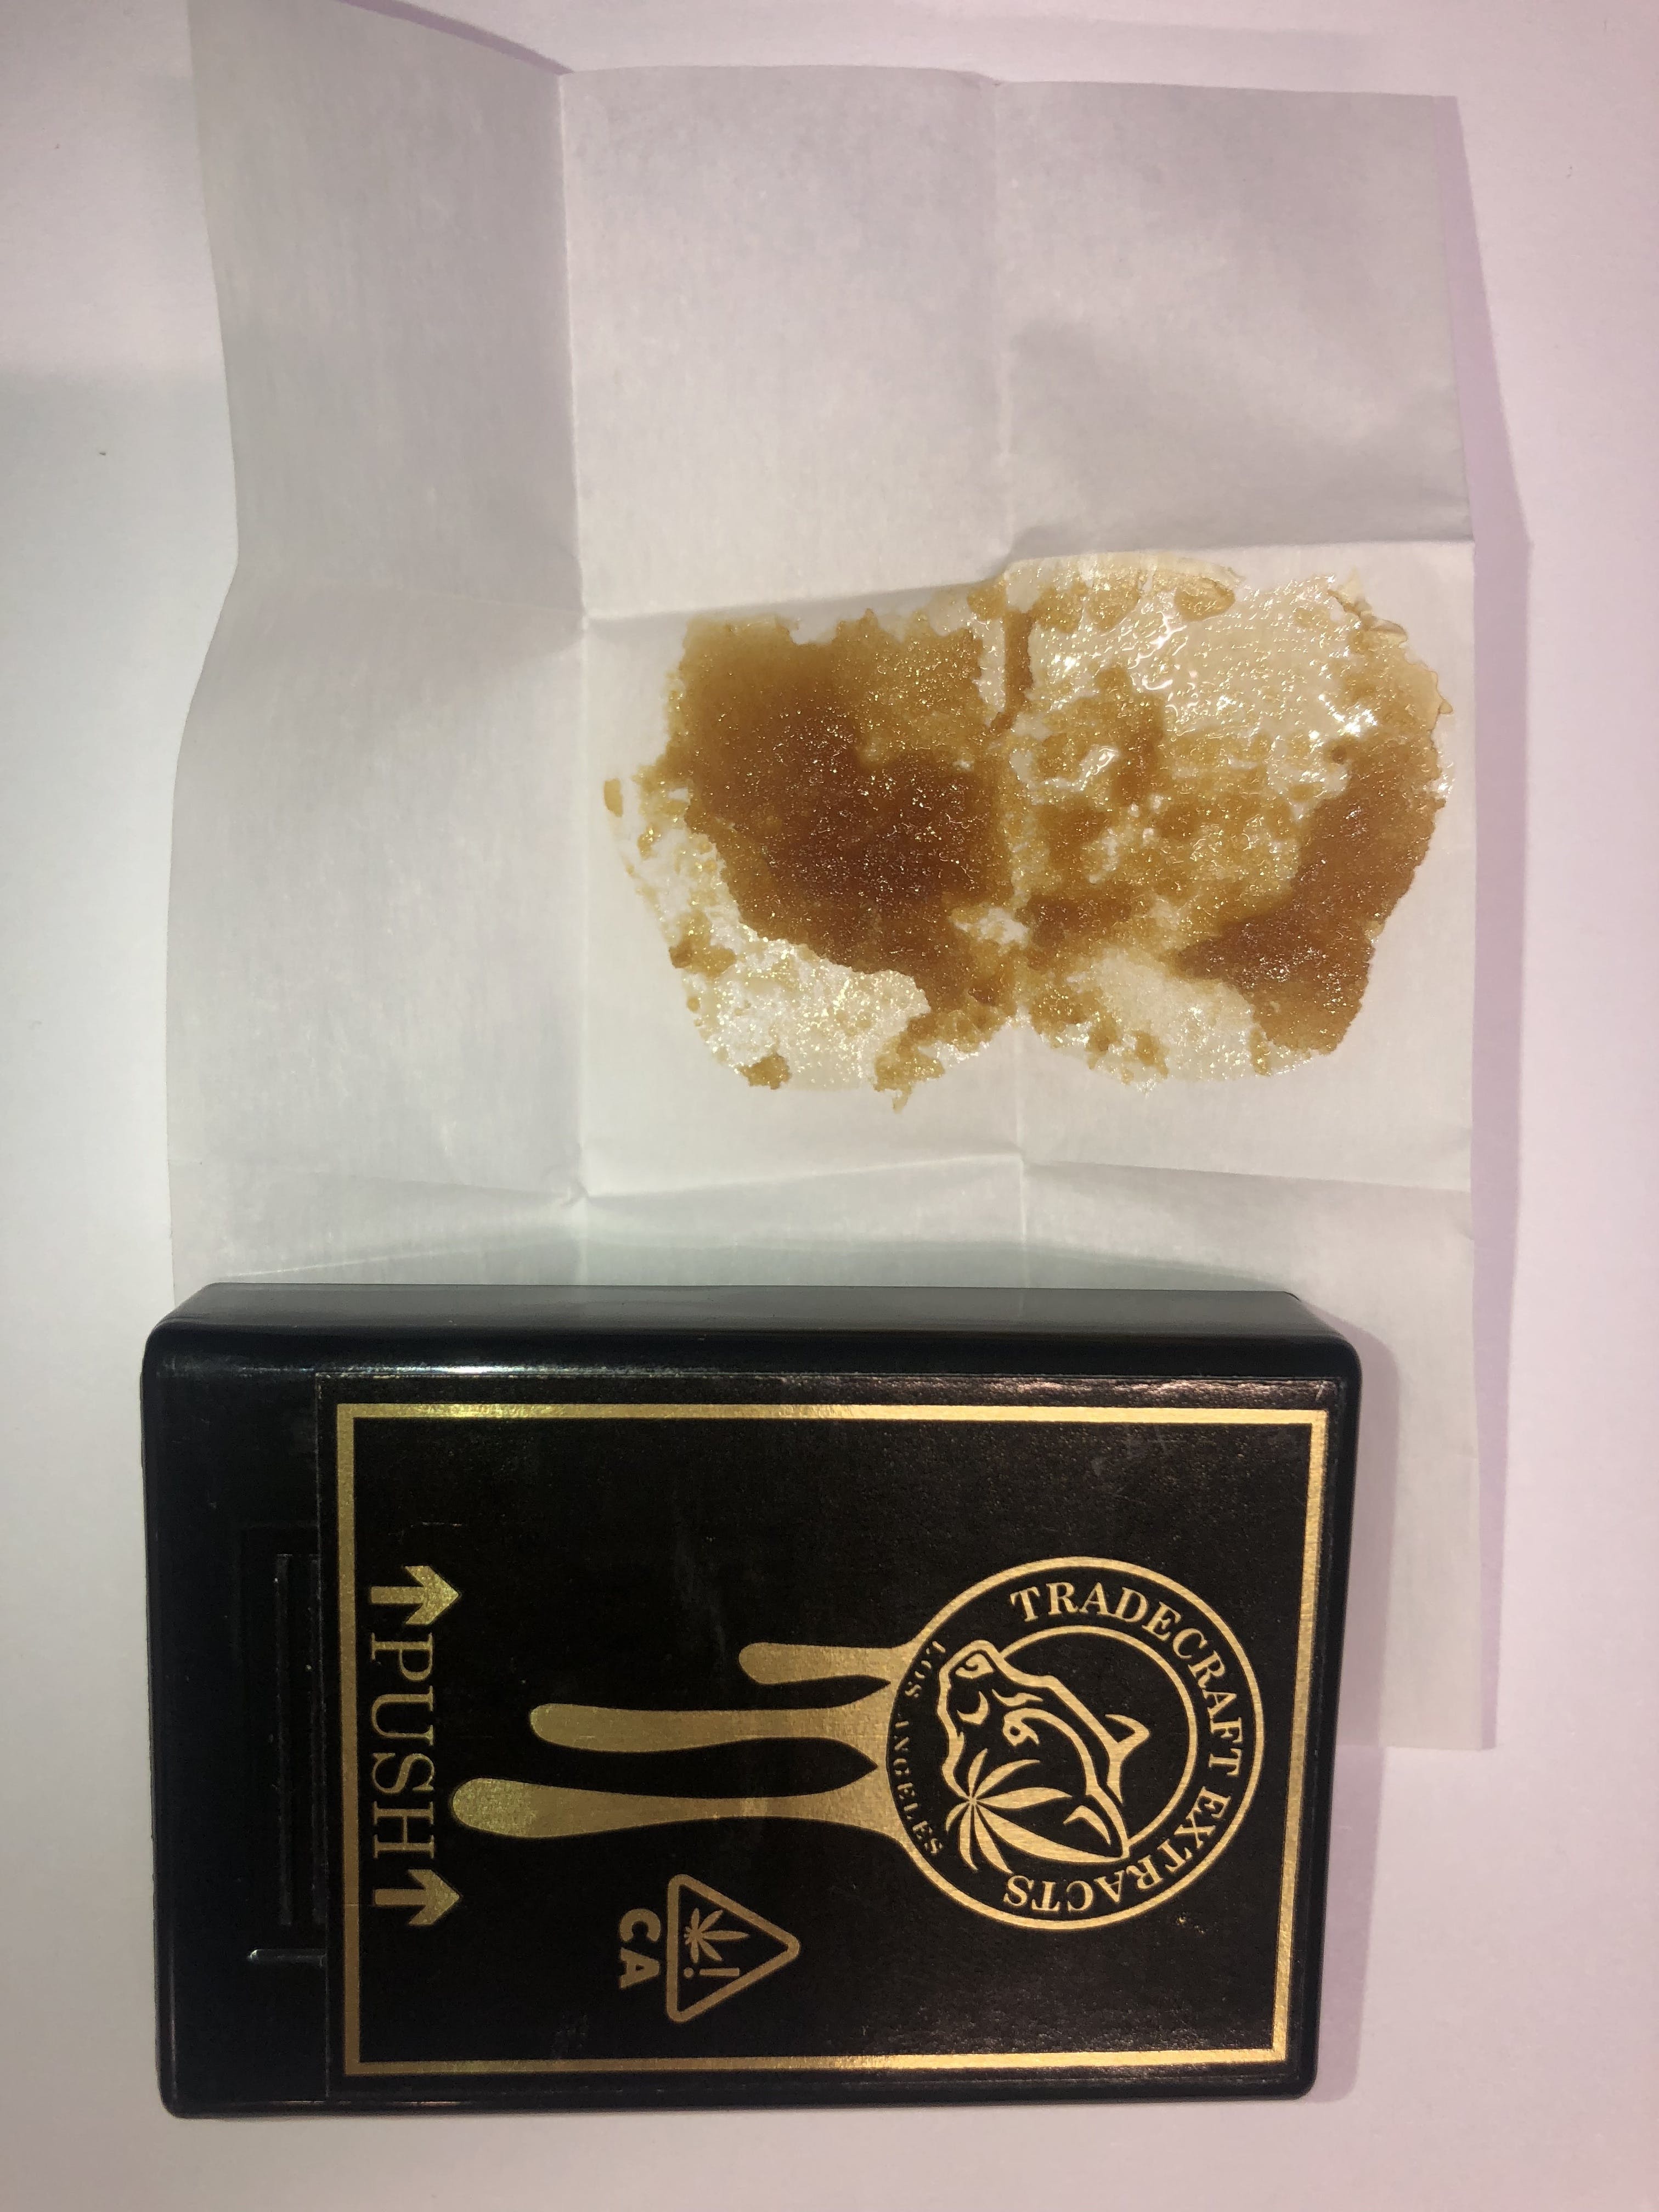 wax-tradecraft-extracts-shatter-bubba-5g